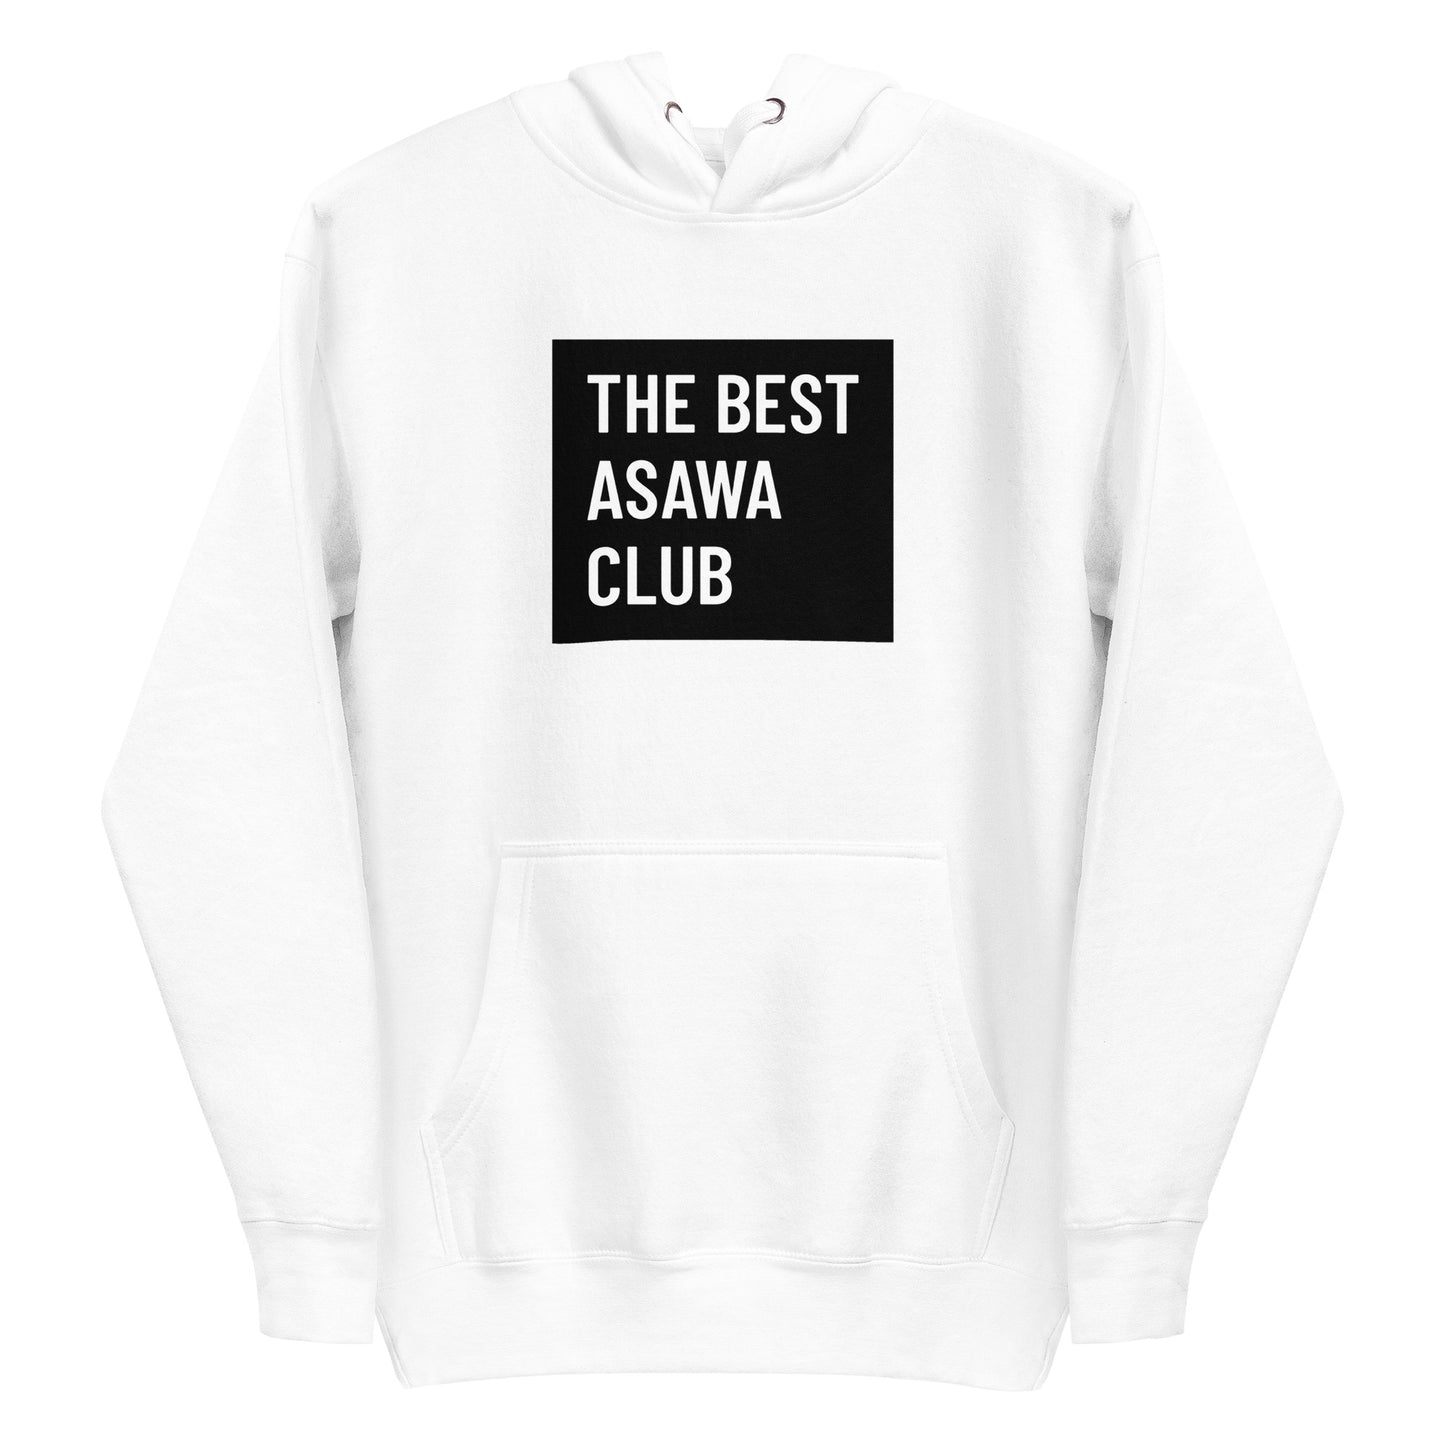 Filipino Hoodie Best Asawa Club Valentine's Day Gift Couple Merch in color variant White